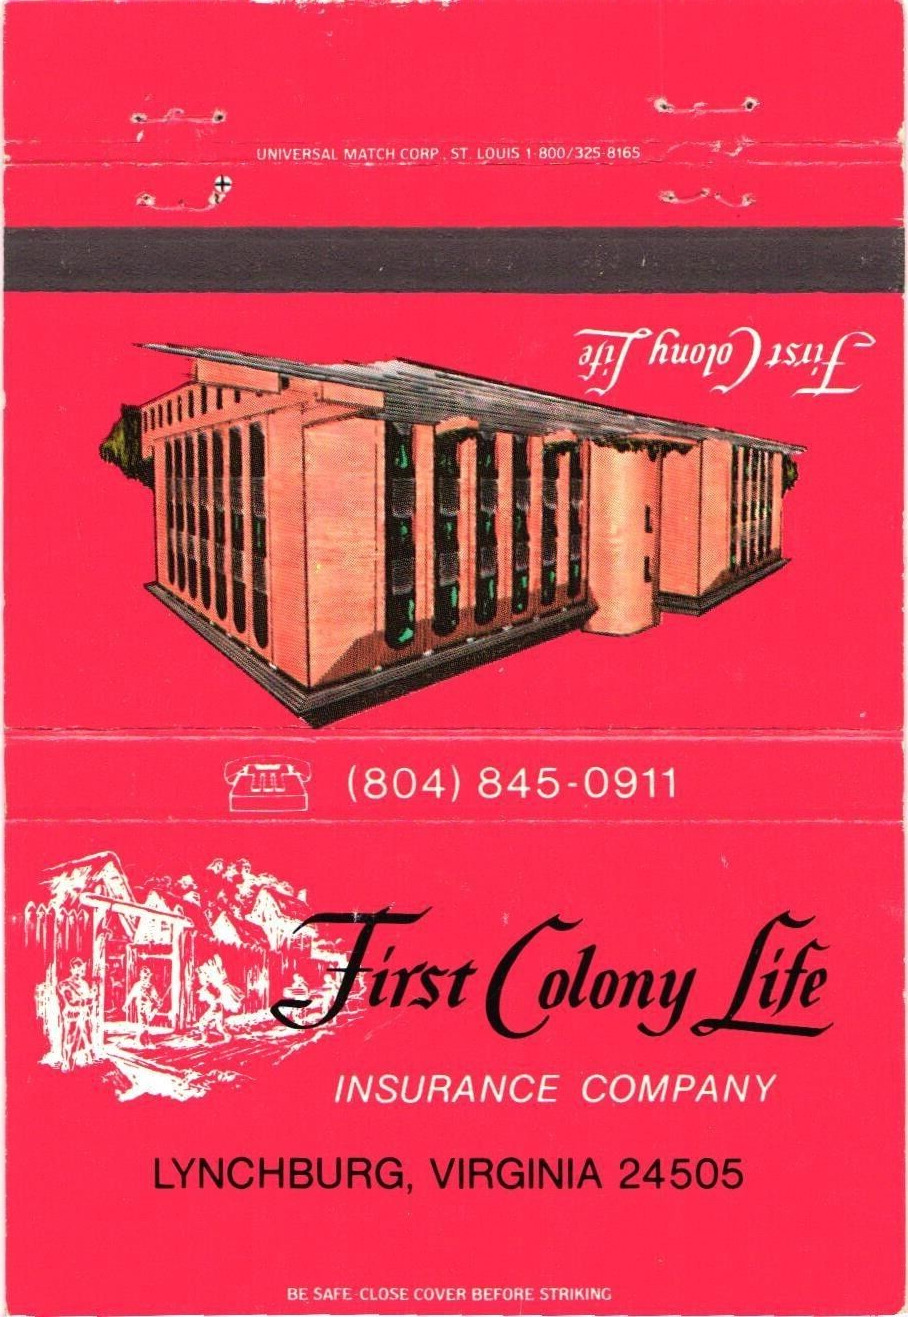 First Colony Life Insurance Company, Lynchburg, Virginia Vintage Matchbook Cover